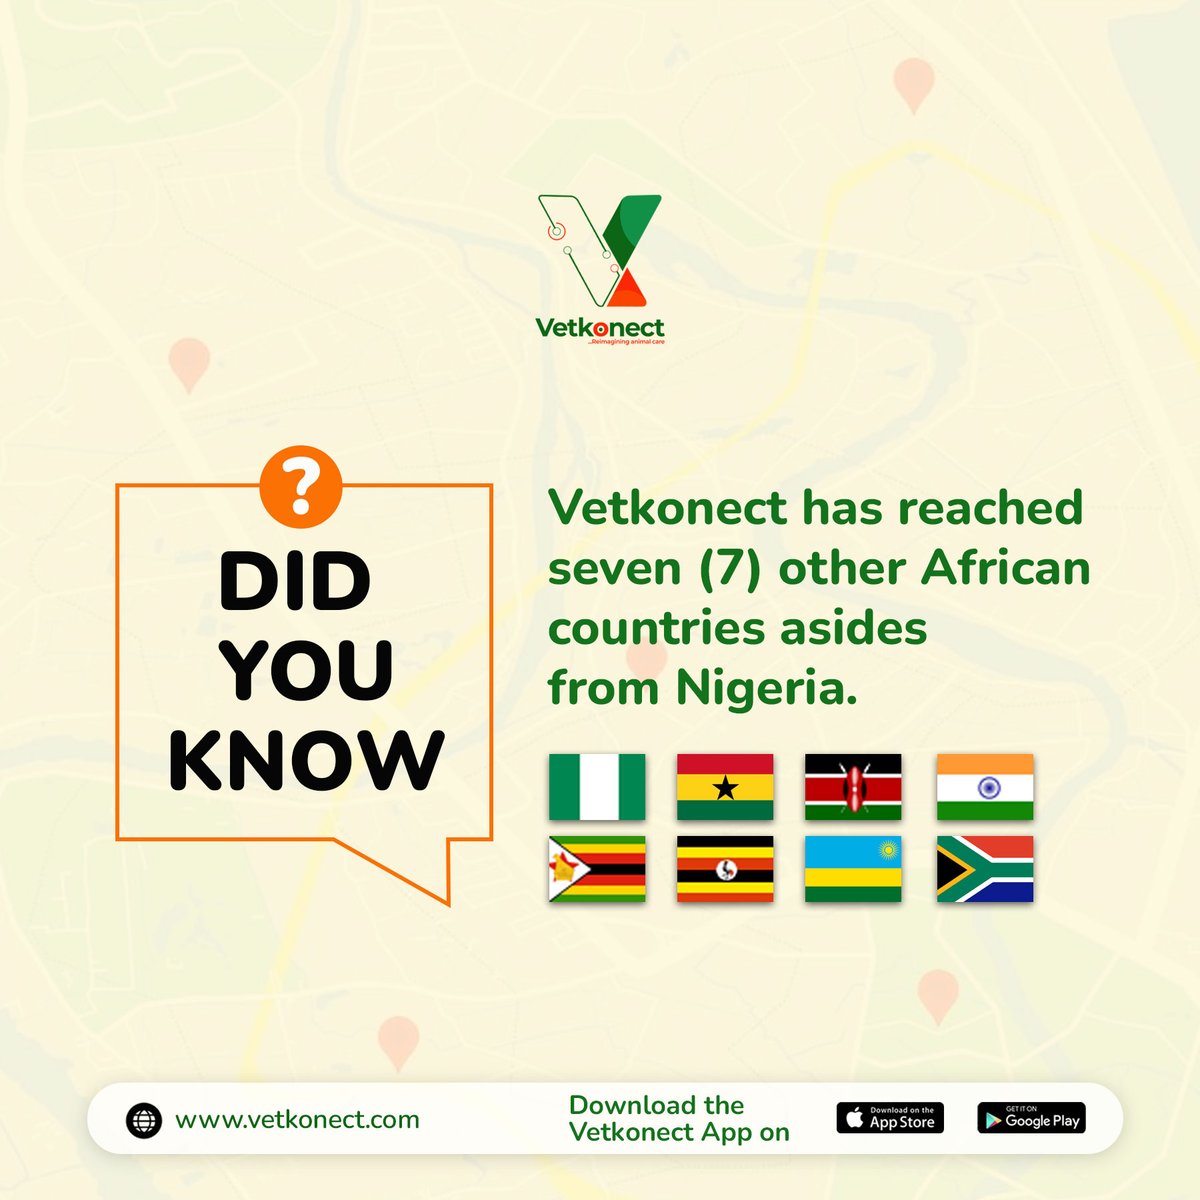 Exciting News! 
Vet Konect Goes Global
We're thrilled to announce that Vet Konect has expanded to 7 countries beyond Nigeria, connecting animal lovers and caregivers worldwide. Join us as we continue to make a positive impact in the global veterinary community! 
#GlobalExpansion